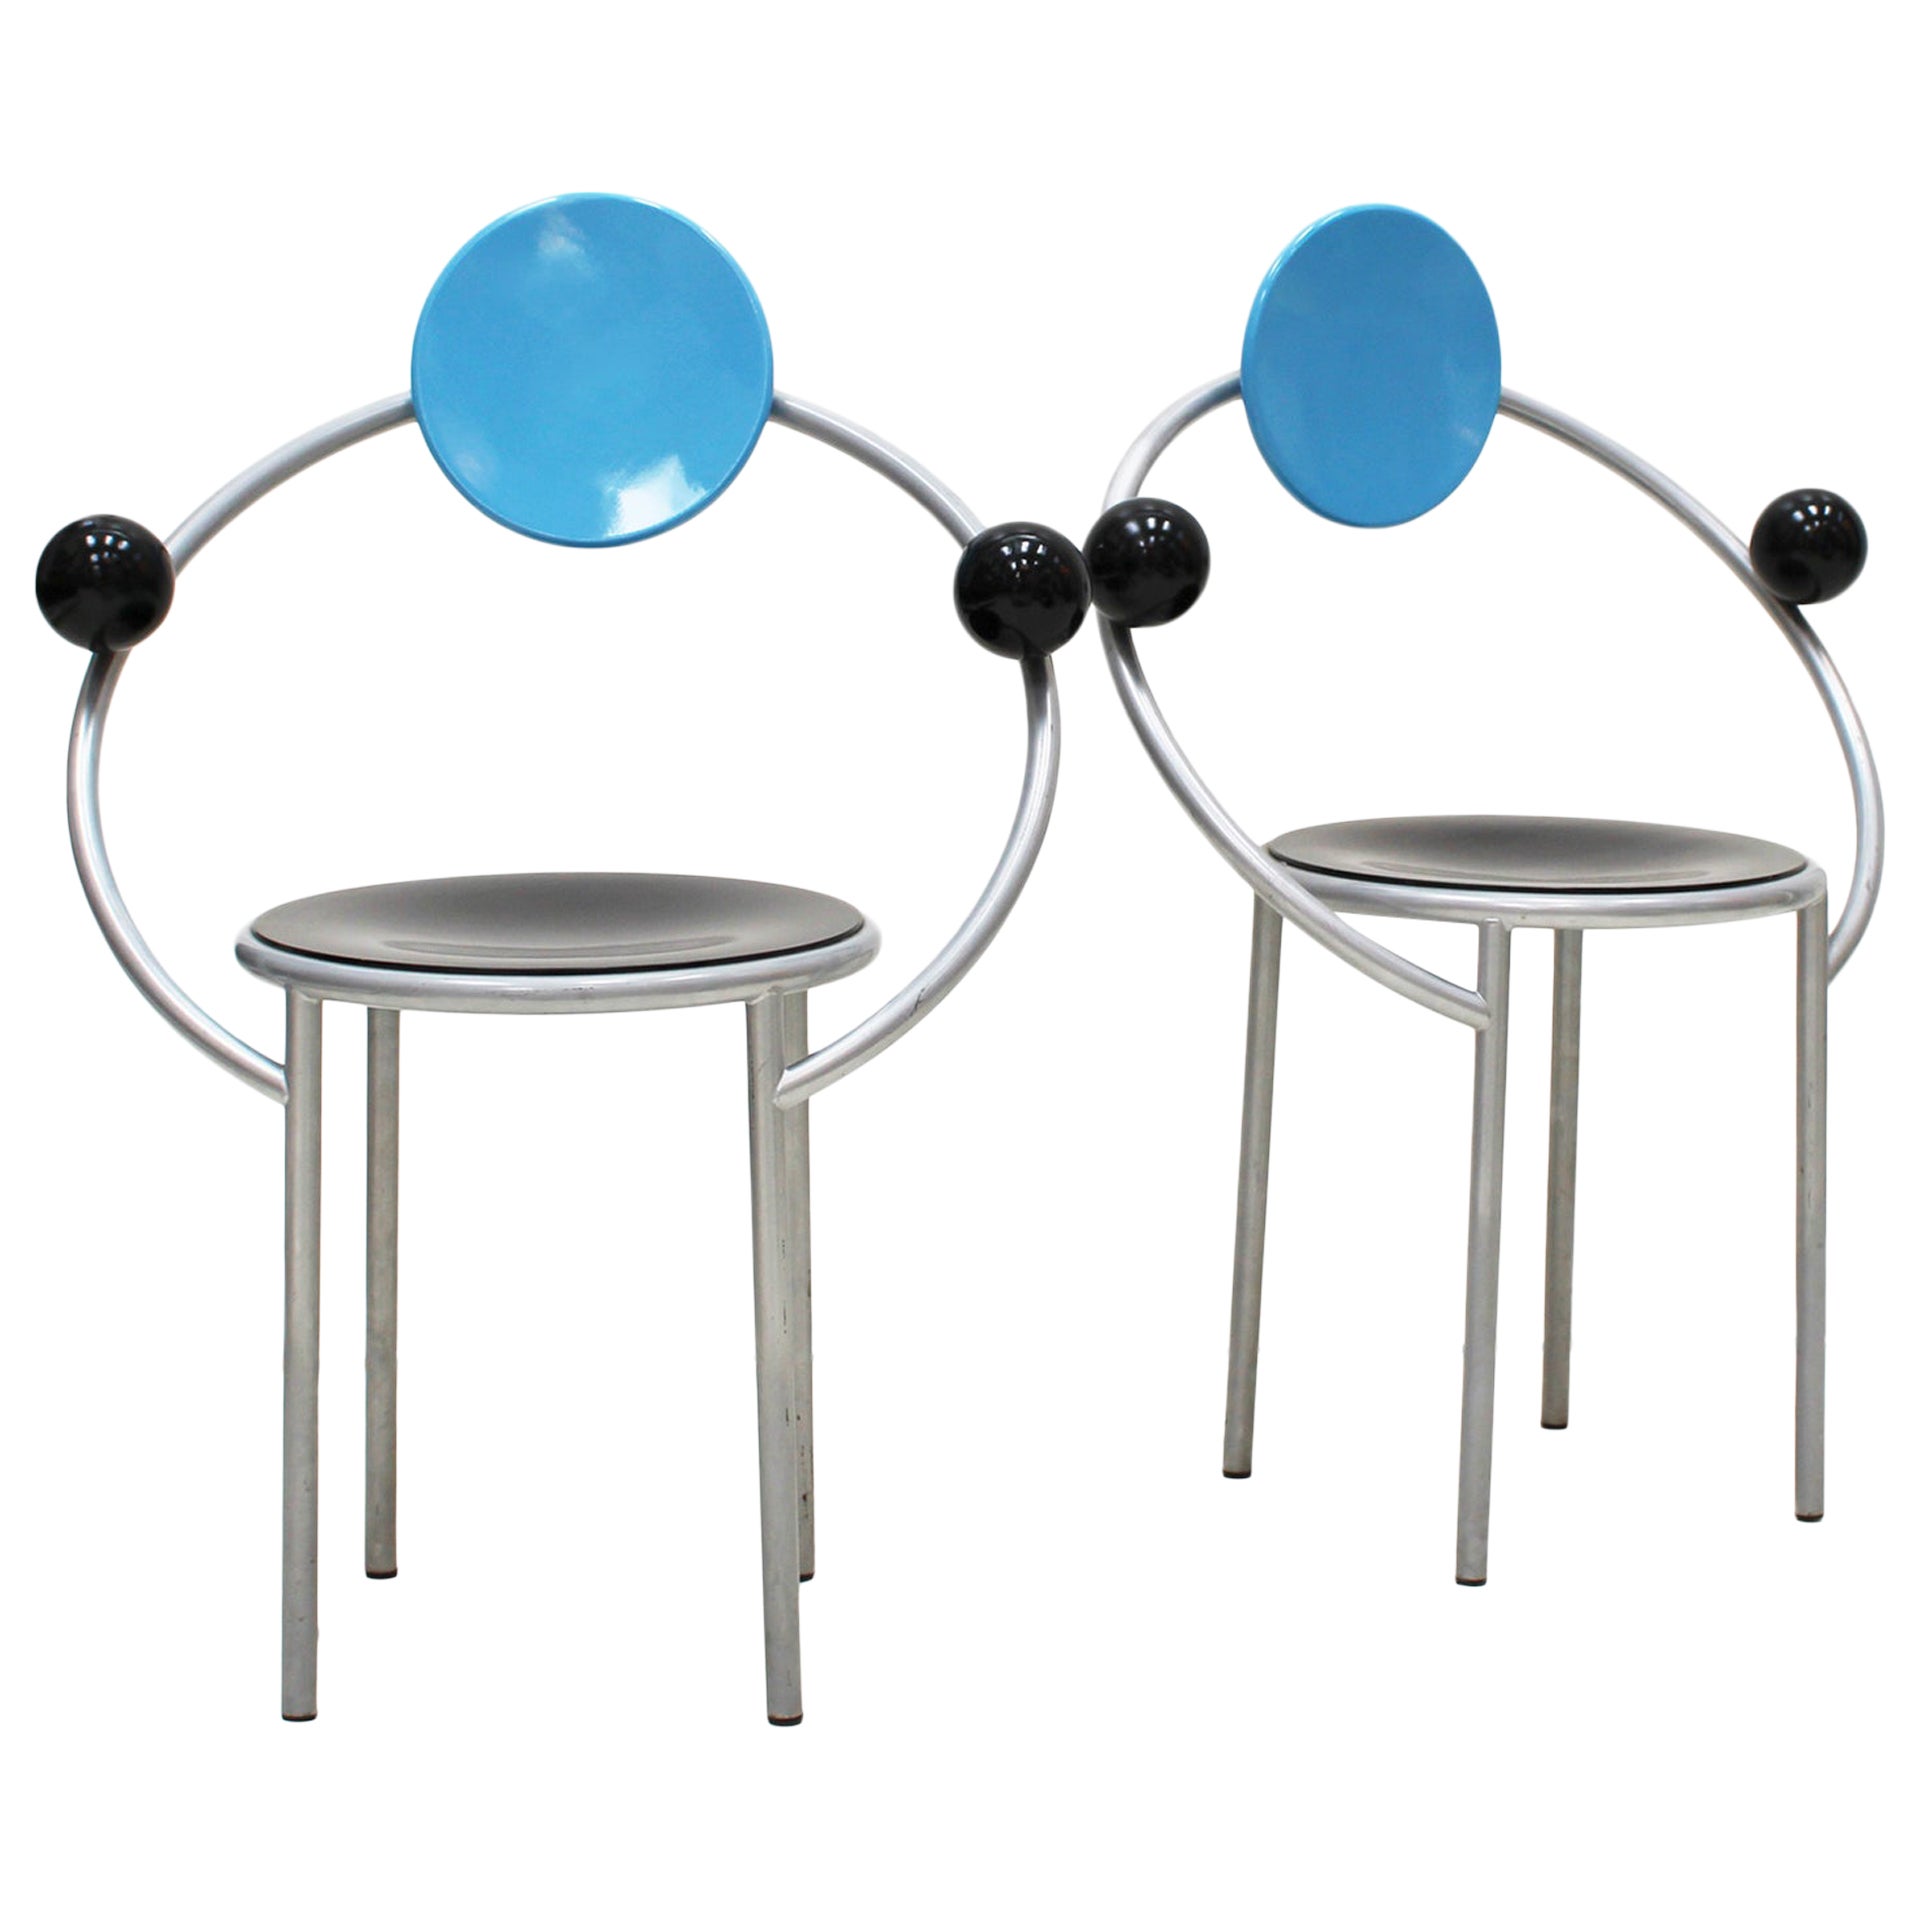 Two Chairs Mod. "First" by Michele de Lucchi for Memphis Milano, Ready to Ship